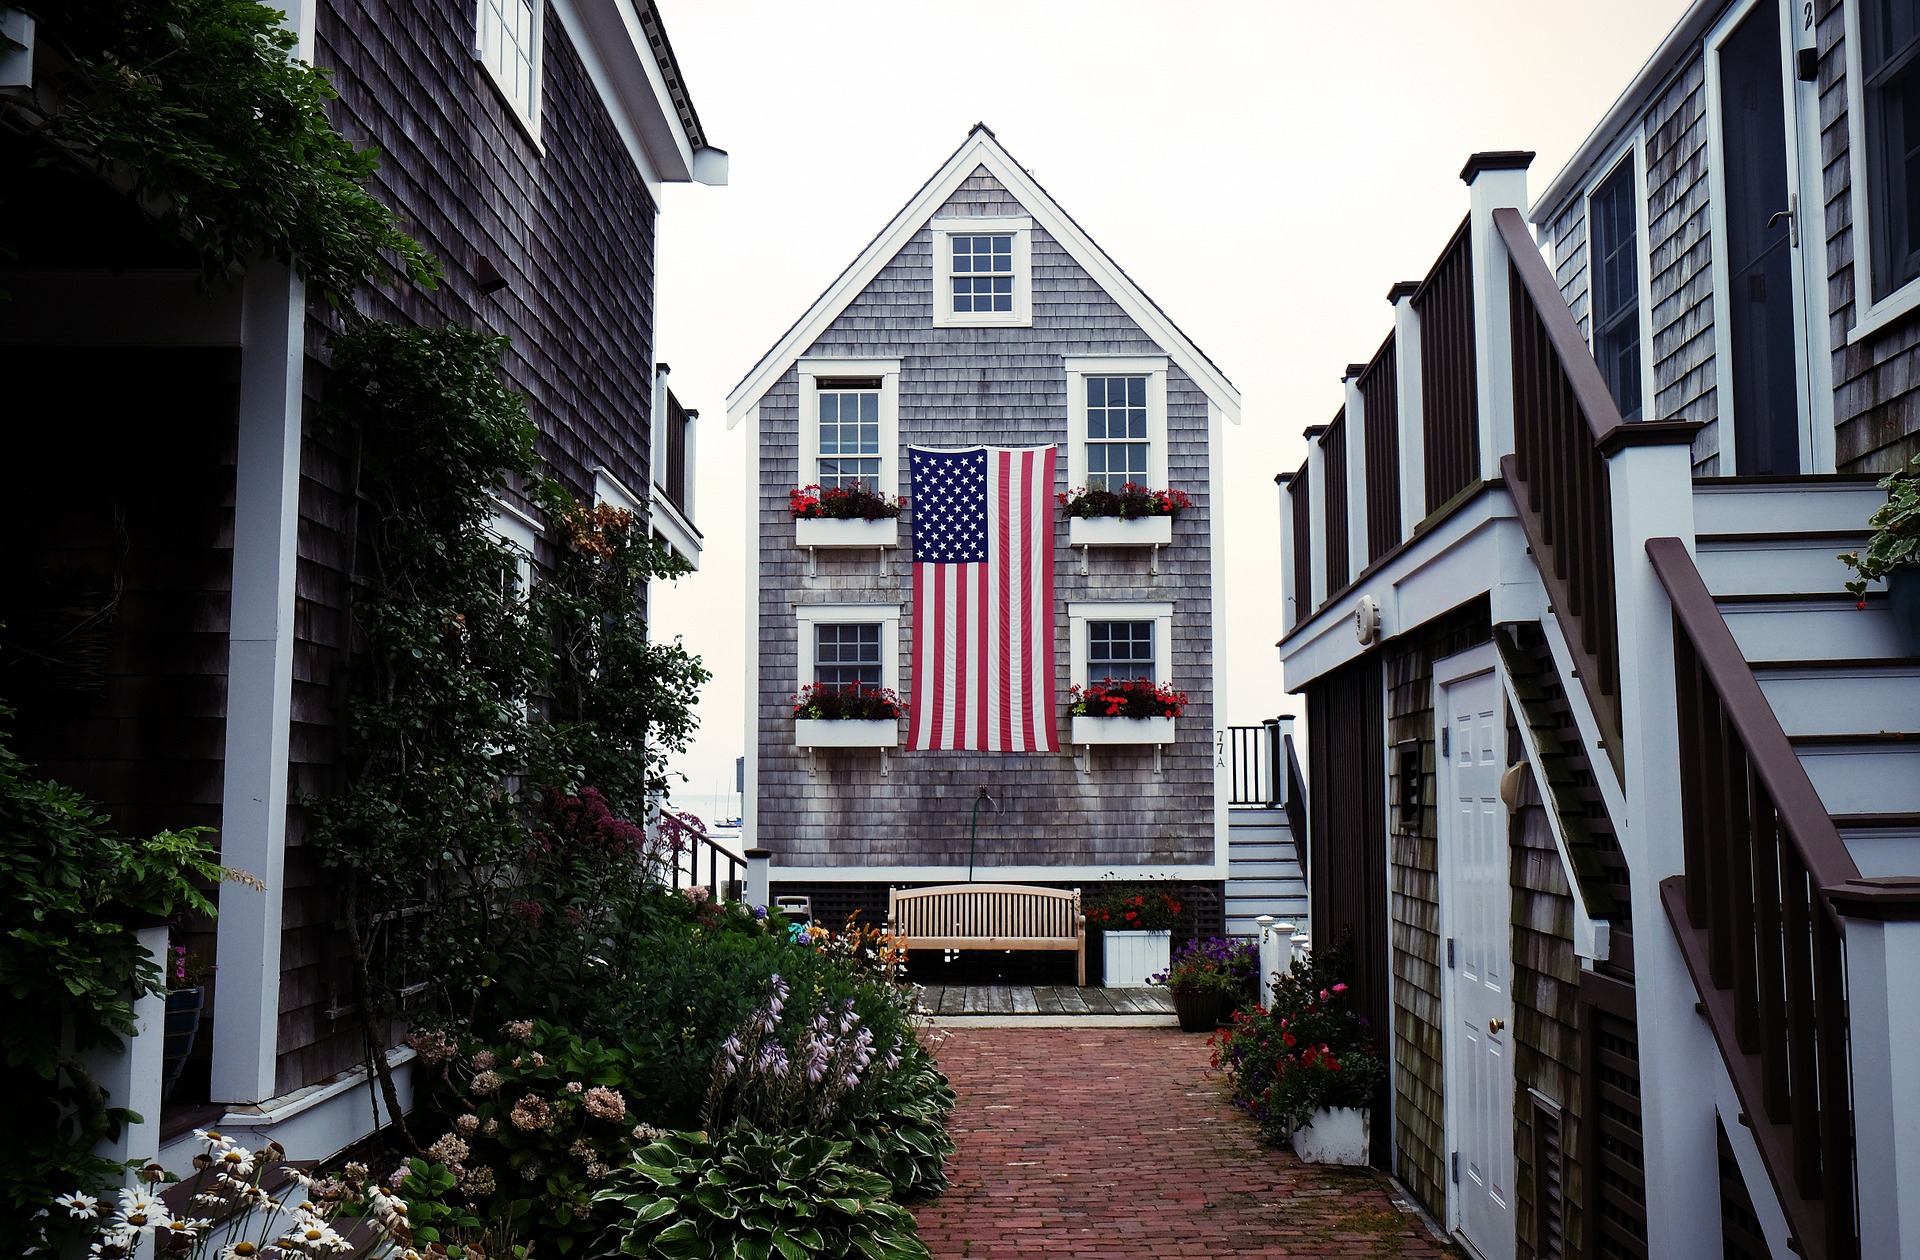 House with American flag